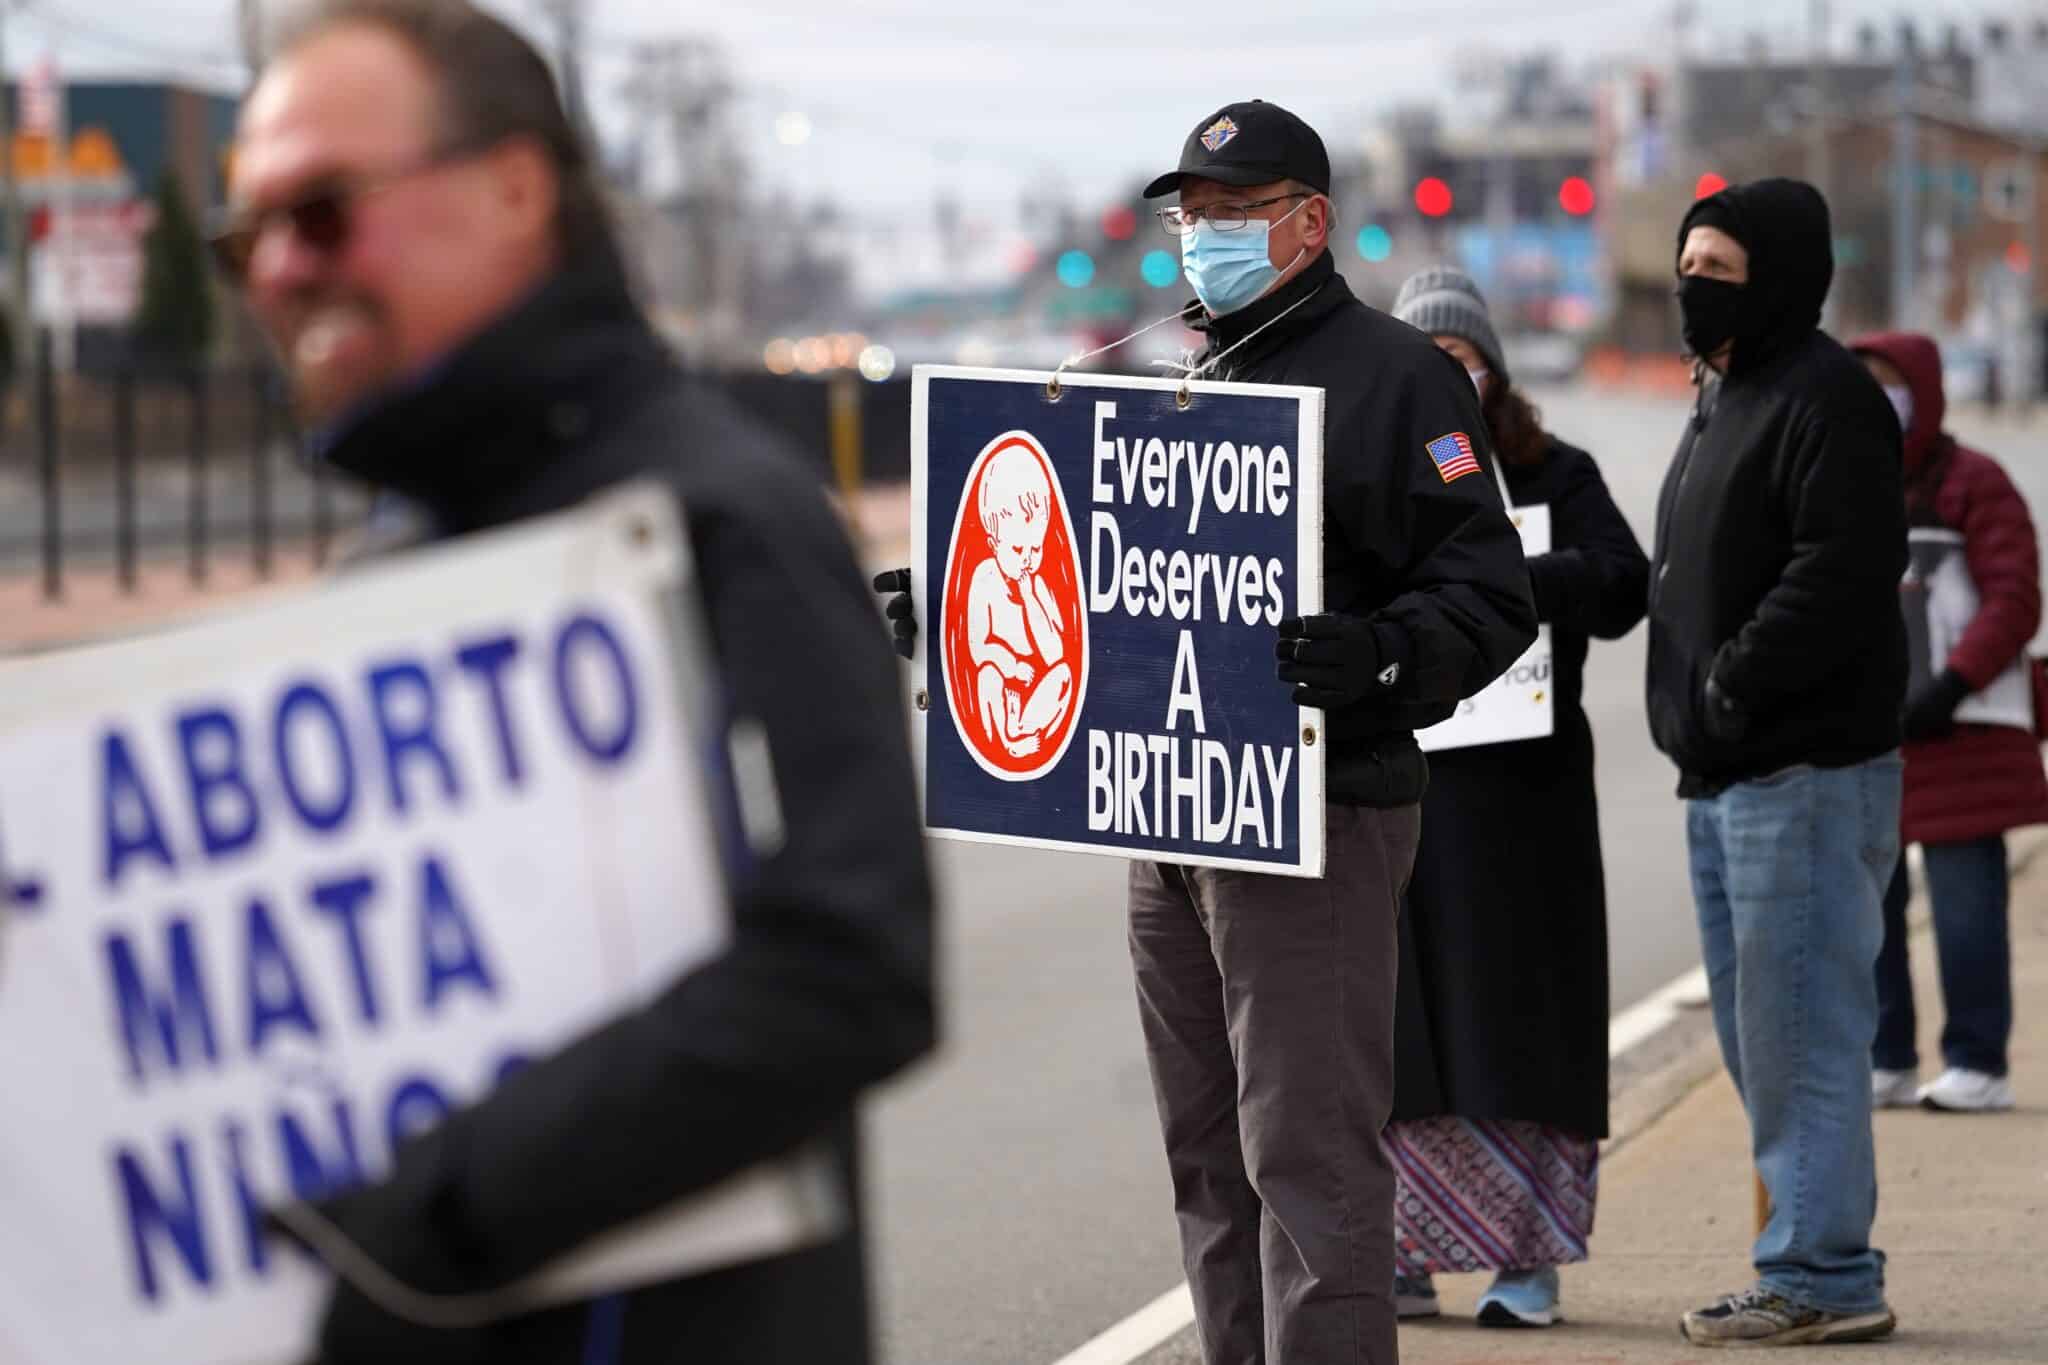 Nick Ulrich, a member of the Knights of Columbus council of Holy Family Parish in Hicksville, N.Y., participates in a pro-life rally outside Nassau University Medical Center in East Meadow, N.Y., Jan. 17, 2021. (OSV News photo/Gregory A. Shemitz)